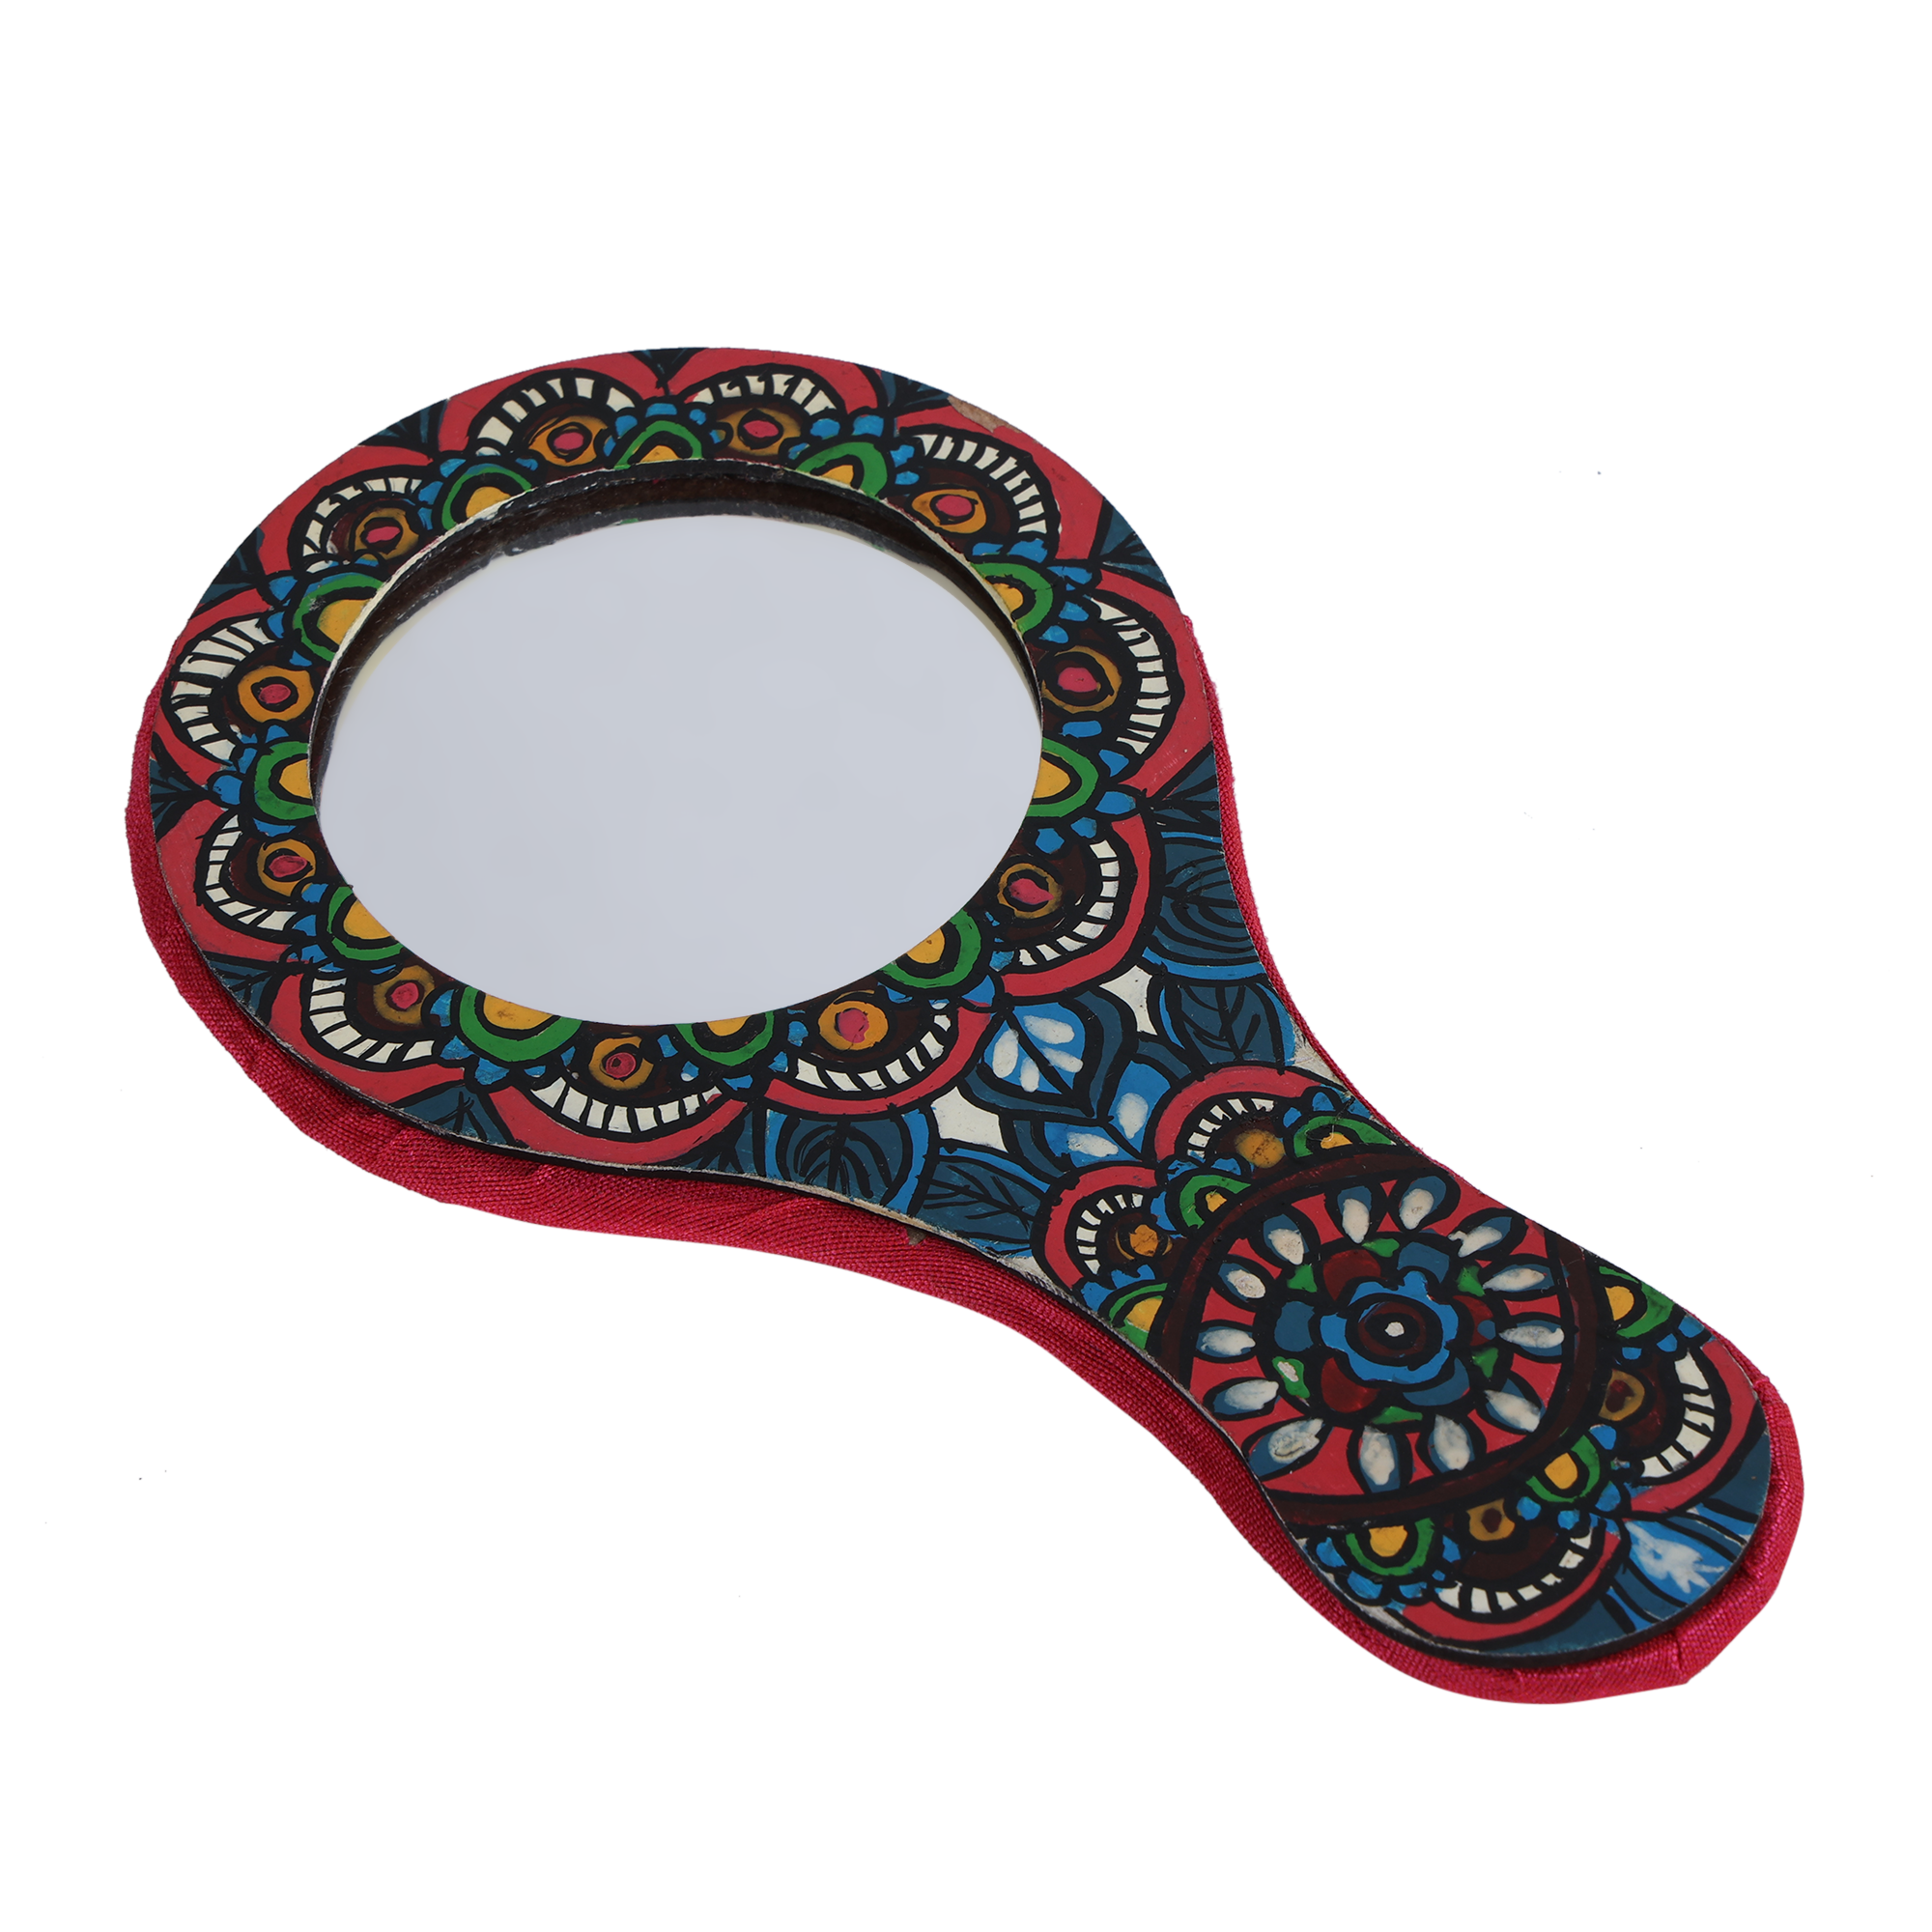 Indha Handcrafted Round Hand Held Mirror |Hand Block Printed Hand | Makeup  |Travelling |Salon Mirror | Decorative Mirror |Wedding Gift - Curated online  shop for handcrafted products made in India by women artisans